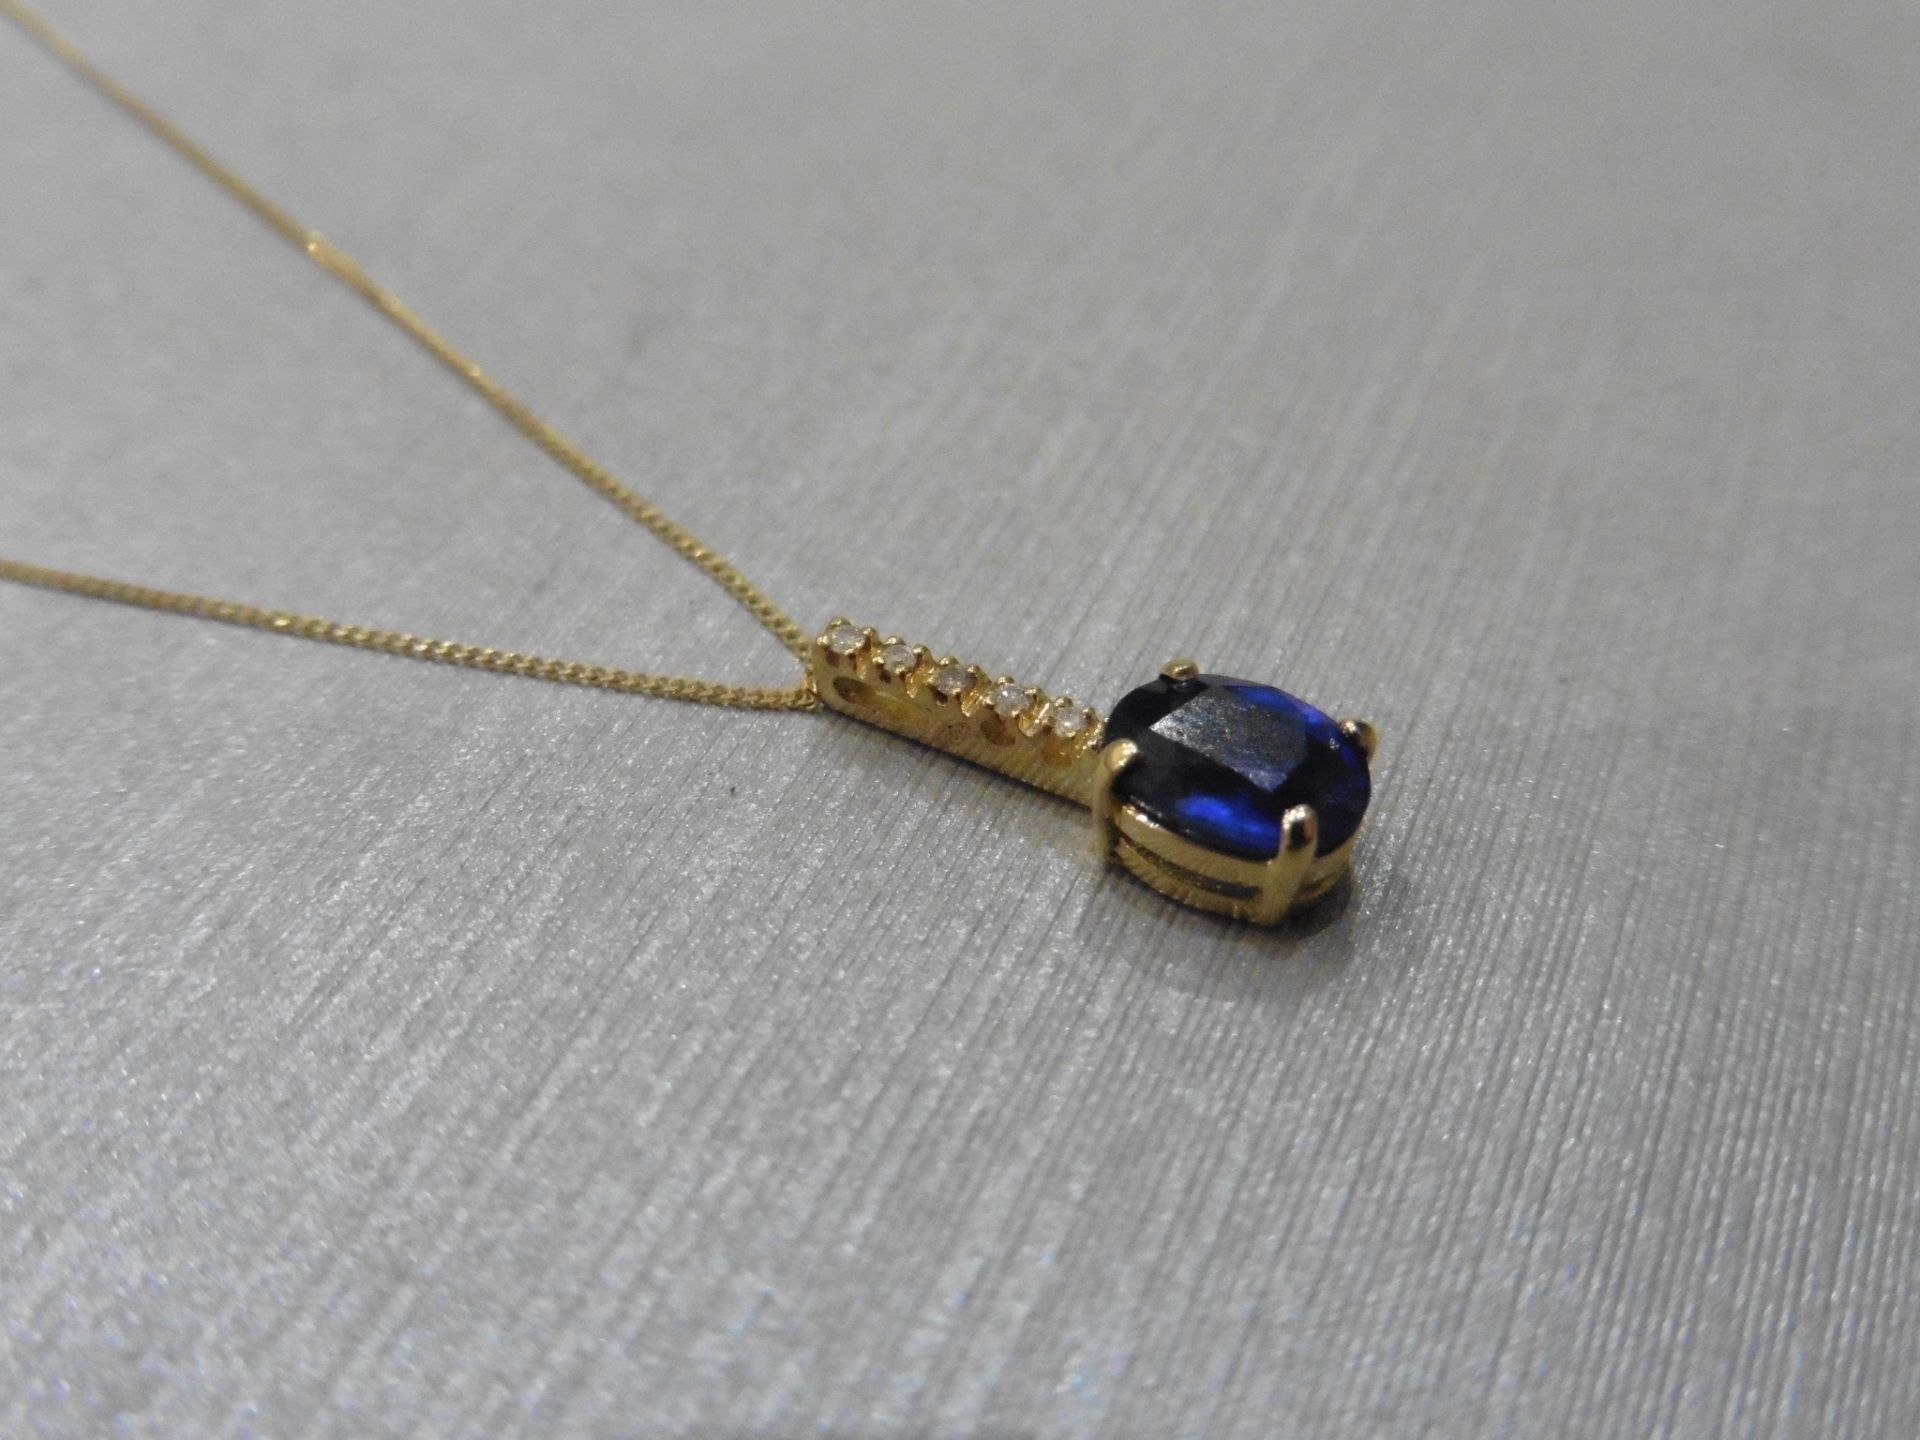 0.80ct sapphire and diamond drop style pendant. 7X 5mm oval sapphire set with 5 small brilliant - Image 2 of 3